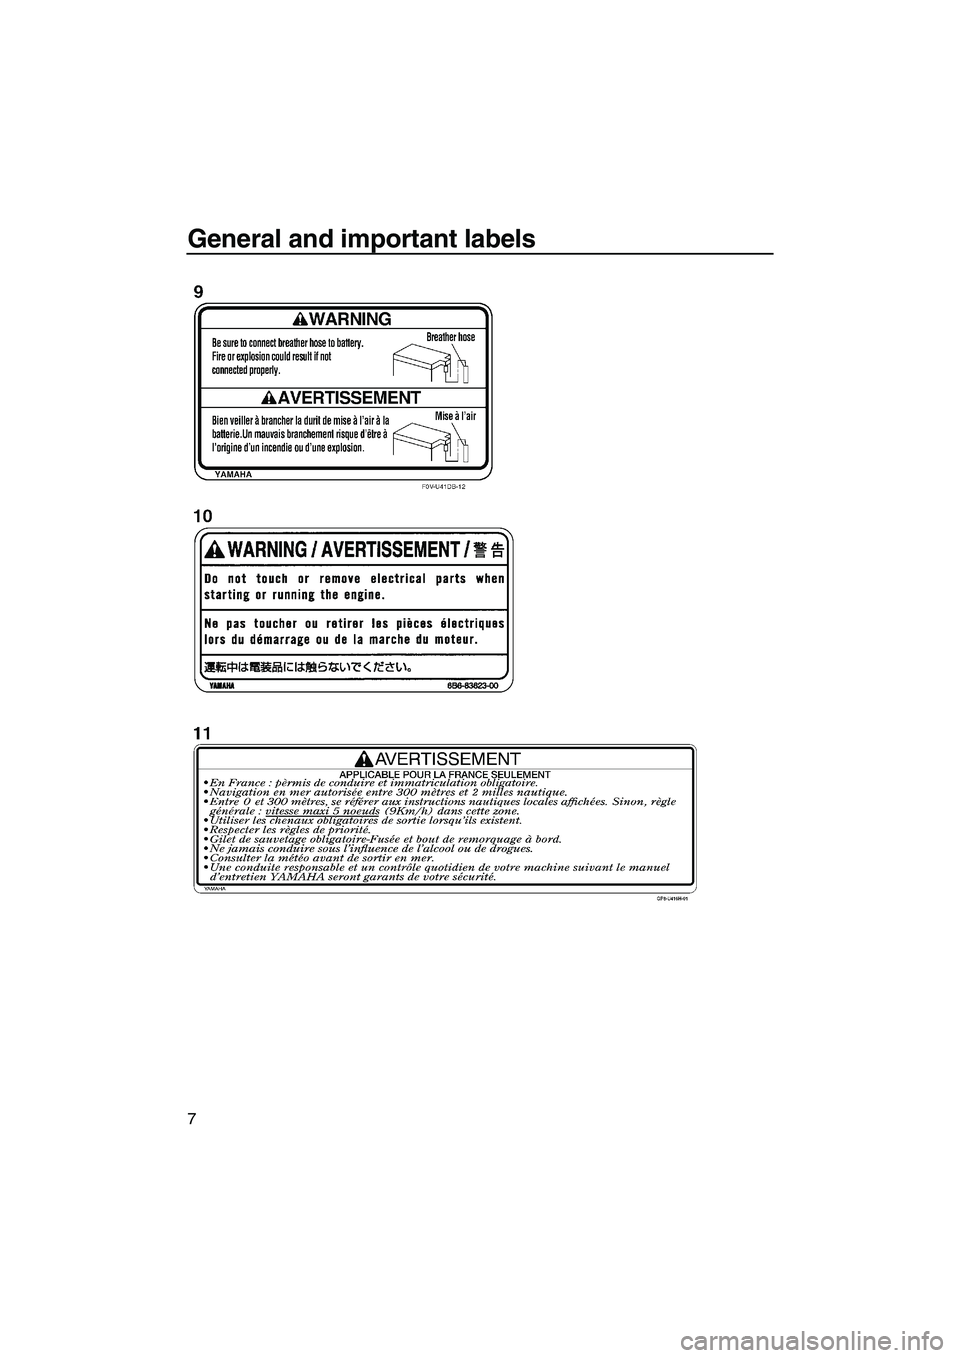 YAMAHA FZS 2010 User Guide General and important labels
7
UF2C71E0.book  Page 7  Friday, July 10, 2009  1:31 PM 